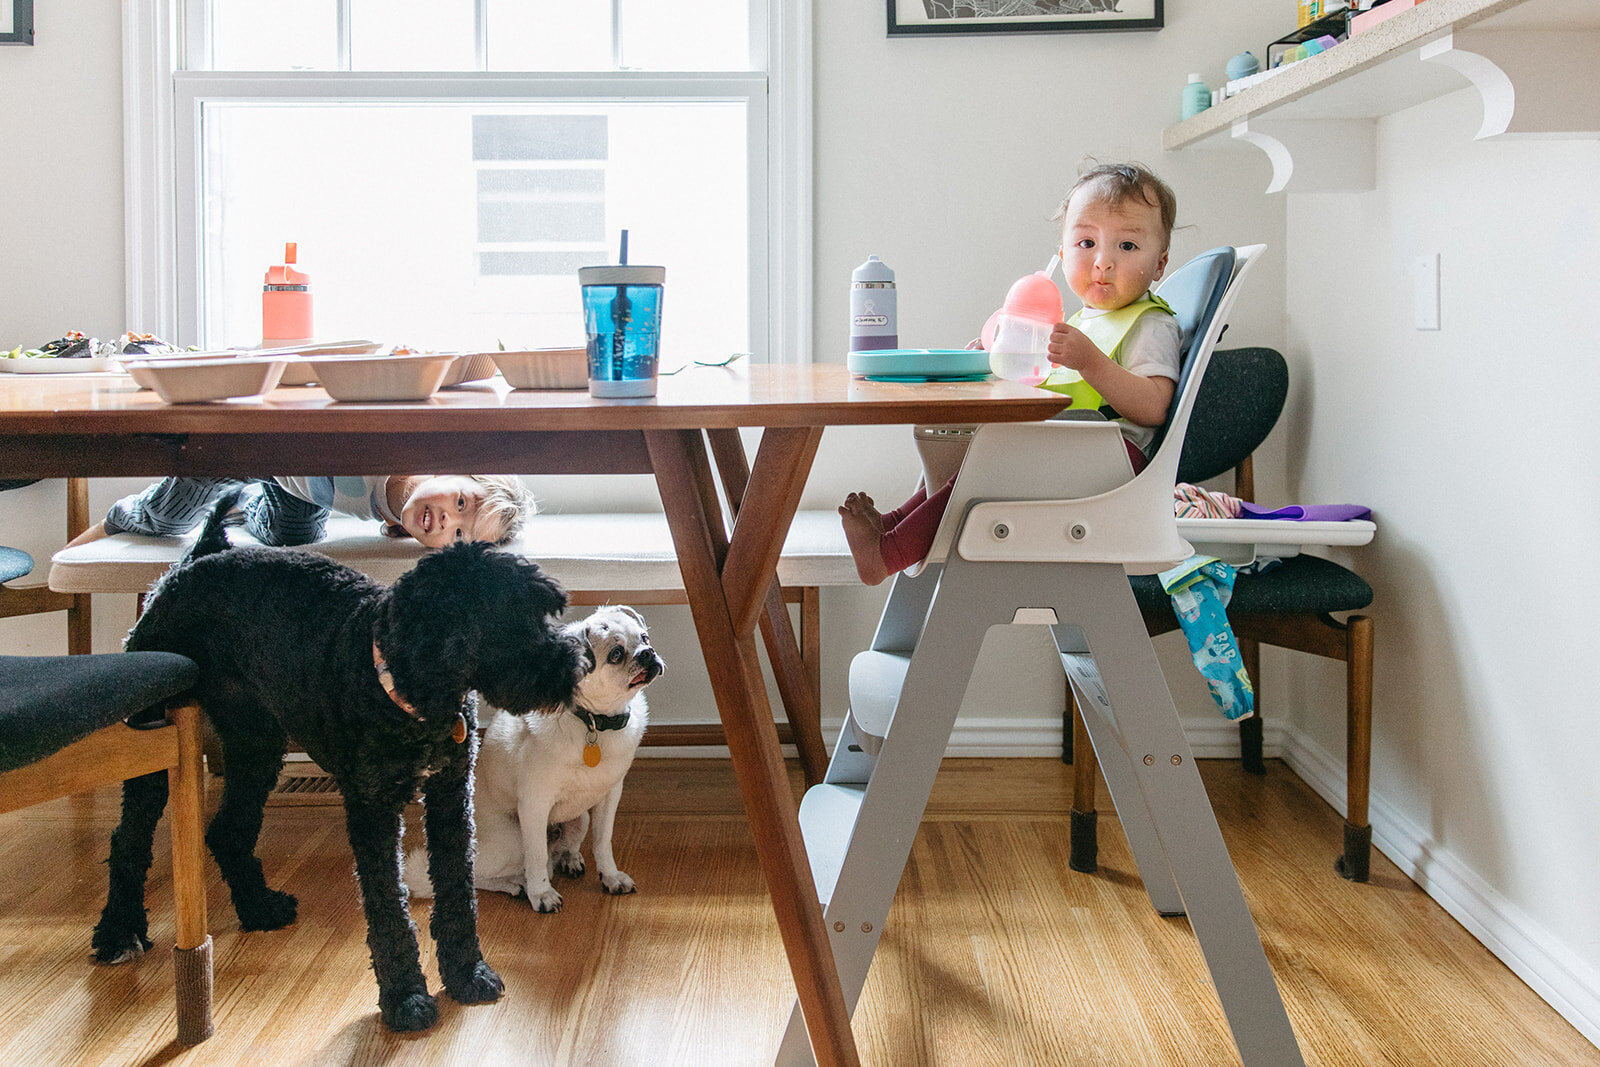 baby in a high chair feeding herself while two dogs stand under the dining table waiting for her to drop something